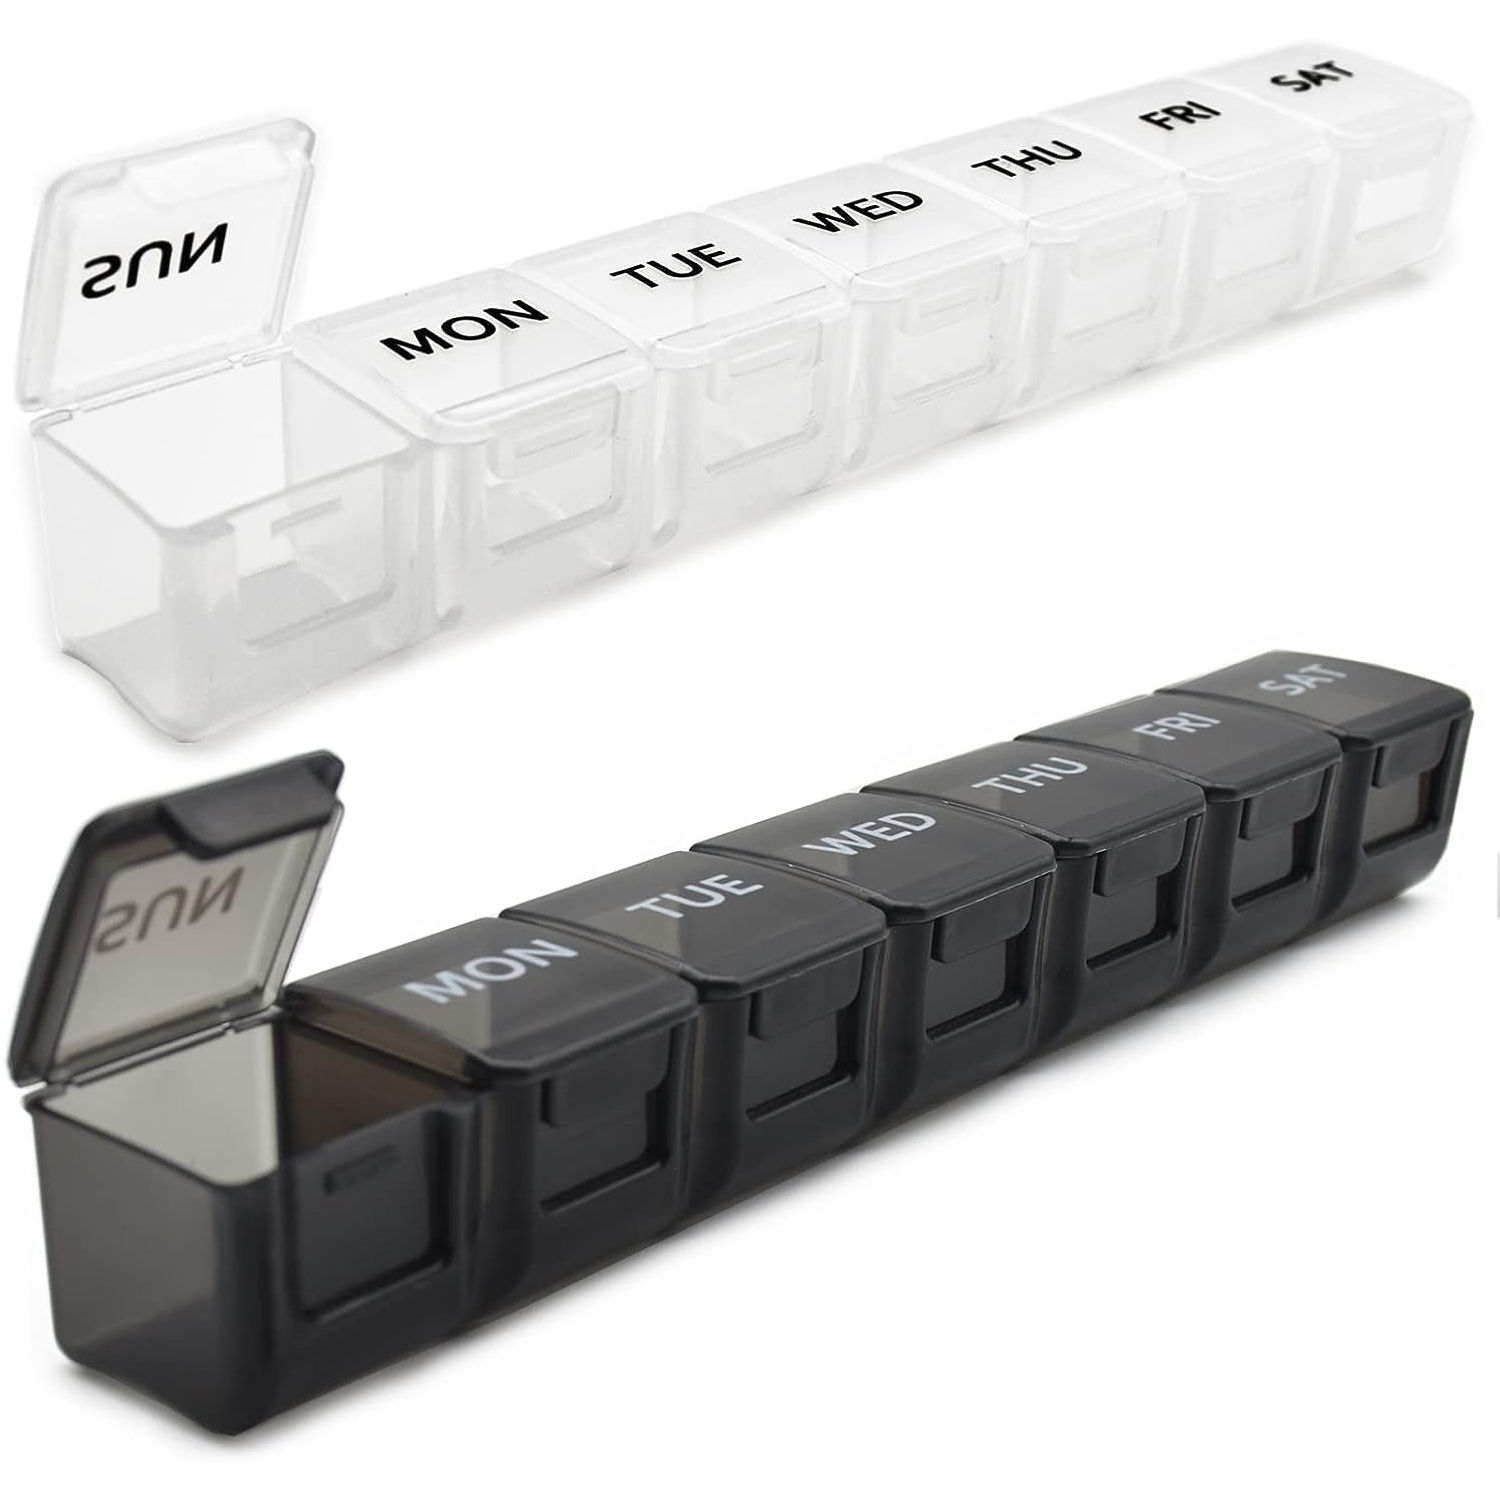 Extra Large Weekly Pill Organizer 2 Times a Day - Betife 7 Day